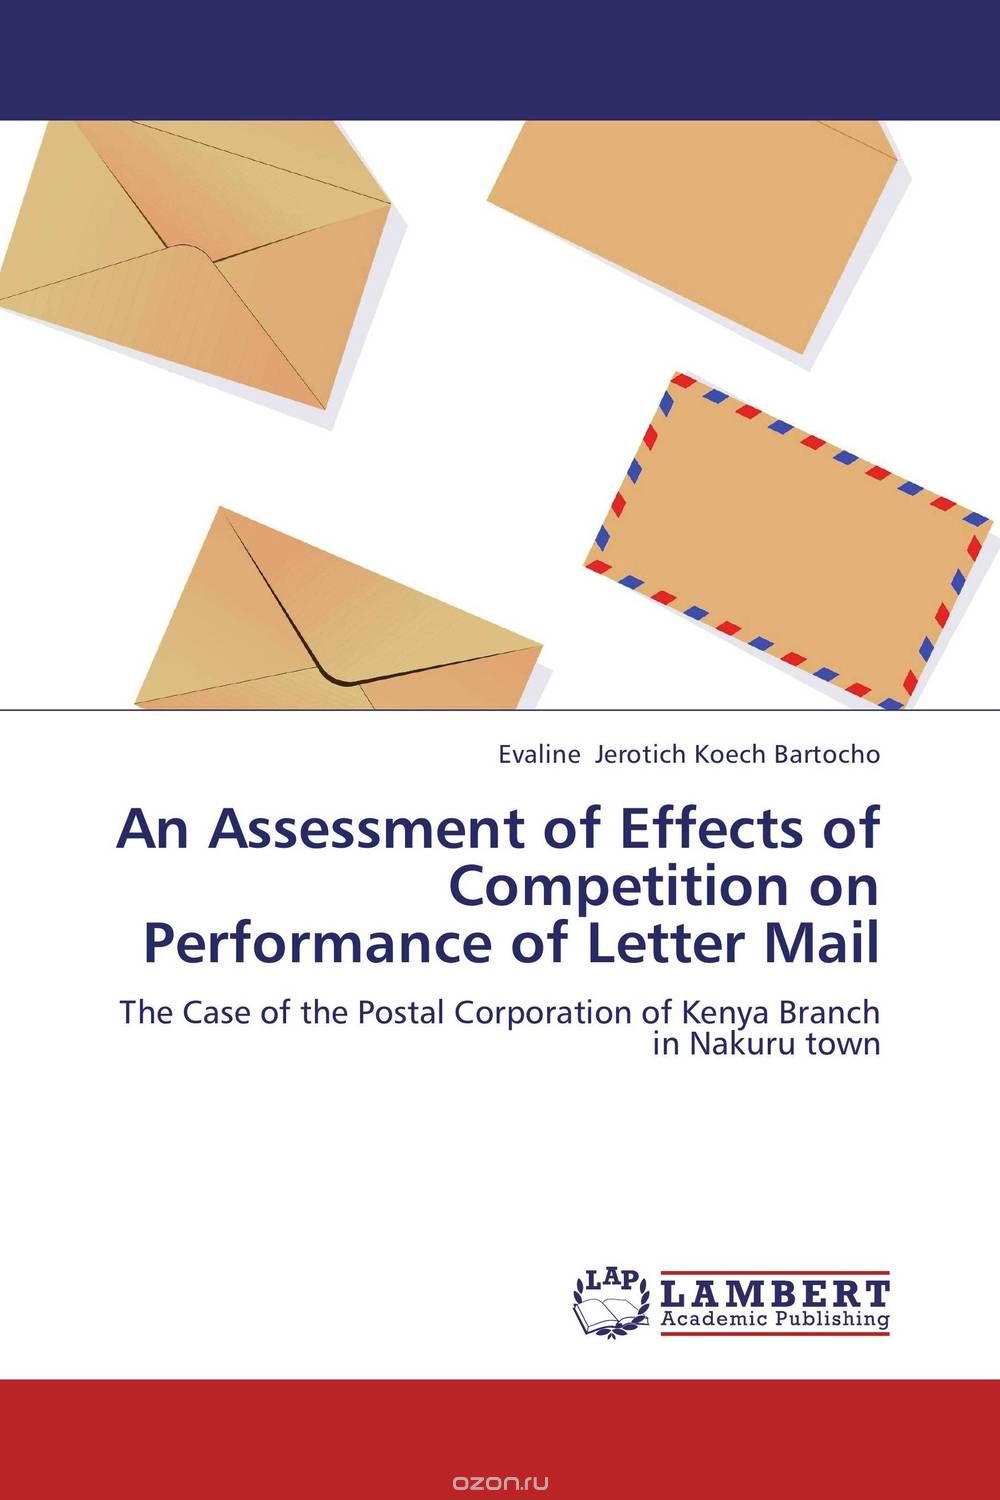 An Assessment of Effects of Competition on Performance of Letter Mail